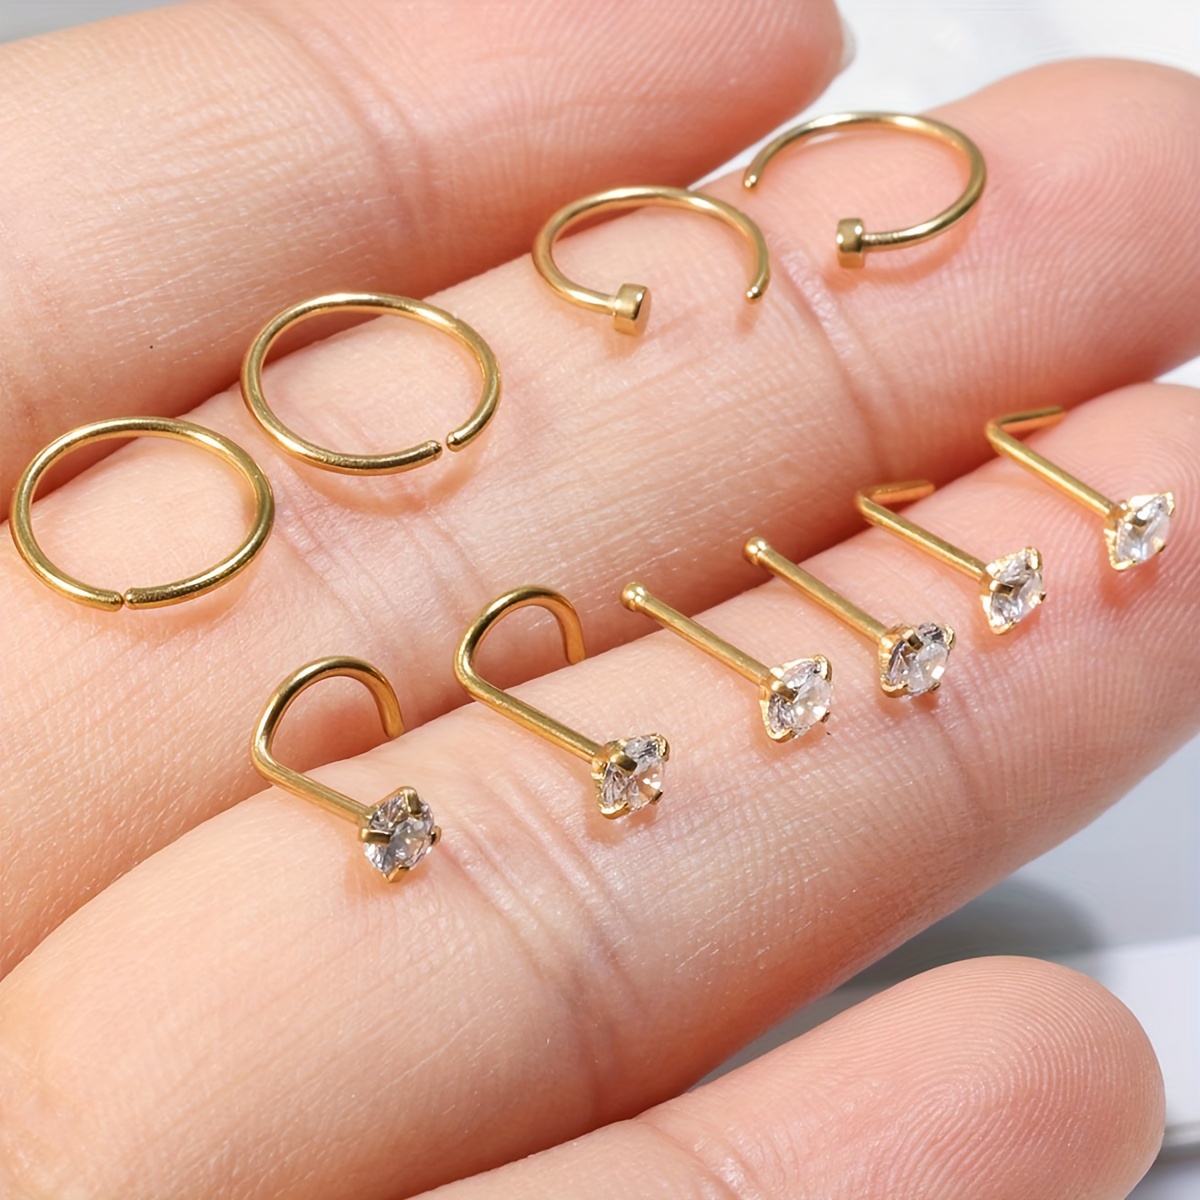 

10pcs 20g Nose Rings And 20g Nose Studs For Women Men, 316l Stainless Steel Nose Rings L Shape/corkscrew/bone Nose Studs Real Body Piercing Jewelry Cz 3mm Hoop Helix Cartilage Daith Tragus Earrings